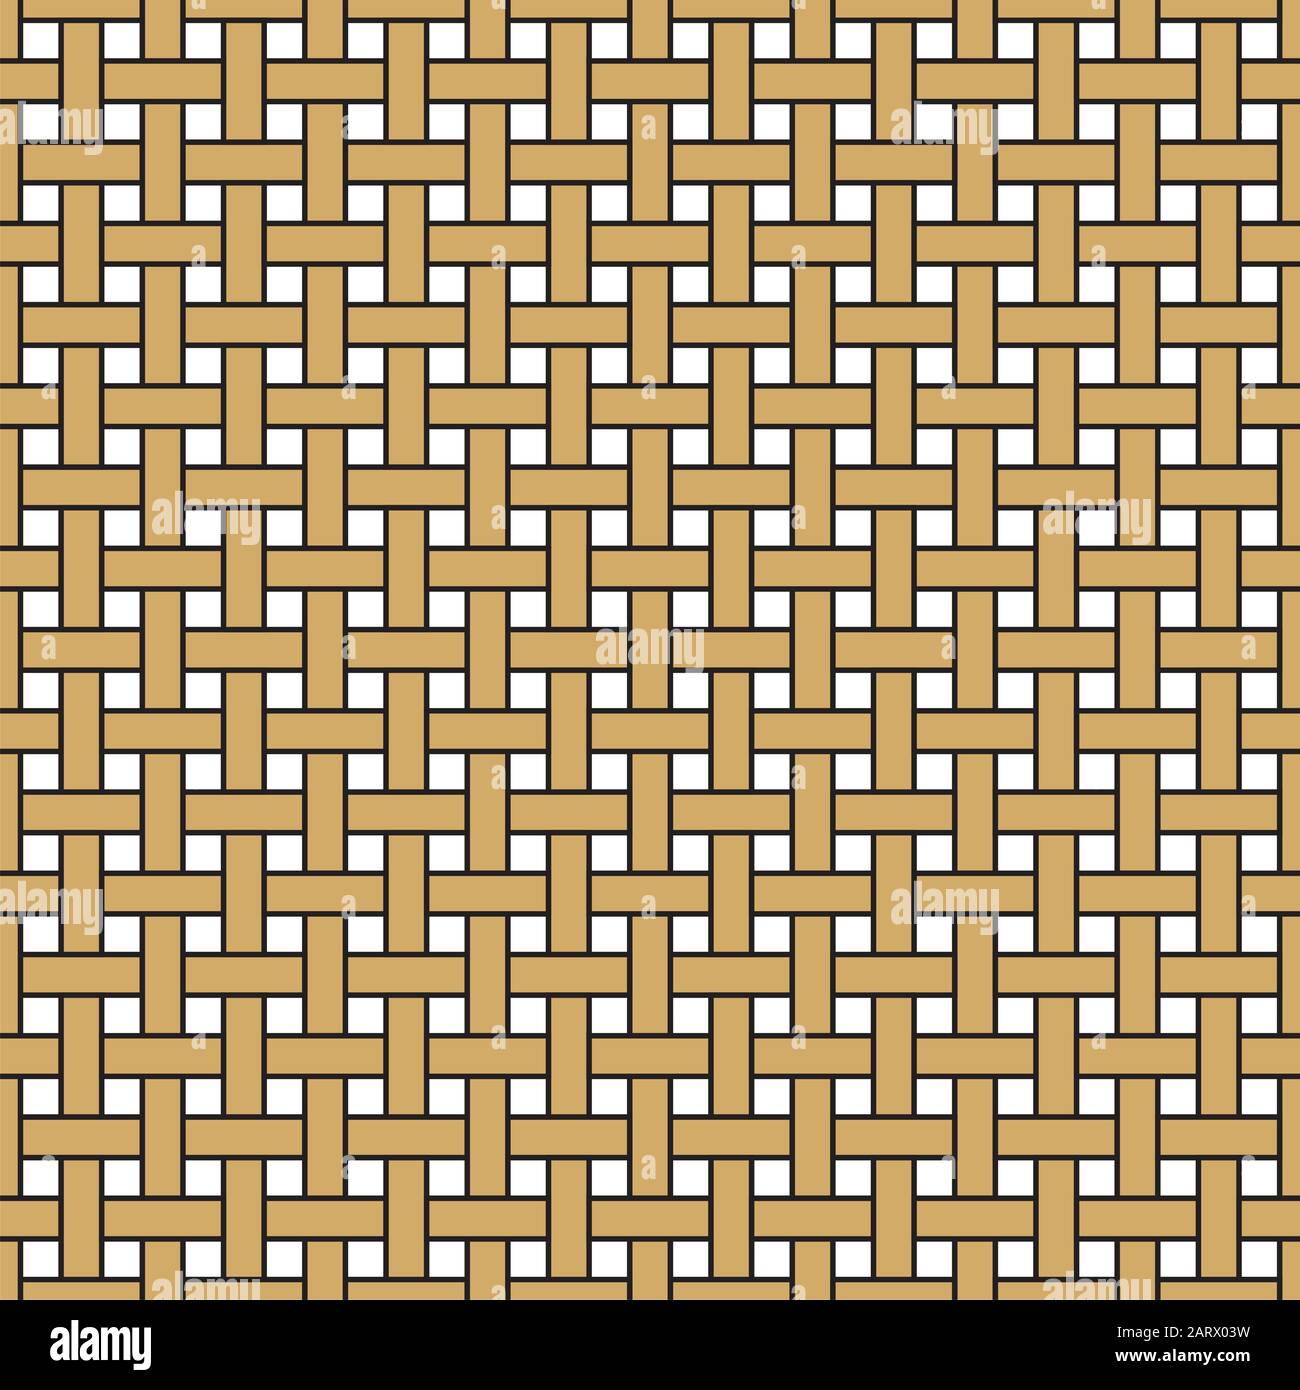 https://c8.alamy.com/comp/2ARX03W/wicker-seamless-pattern-basket-weave-repeating-texture-braiding-continuous-background-of-vertical-and-horizontal-intersecting-perpendicular-stripes-2ARX03W.jpg